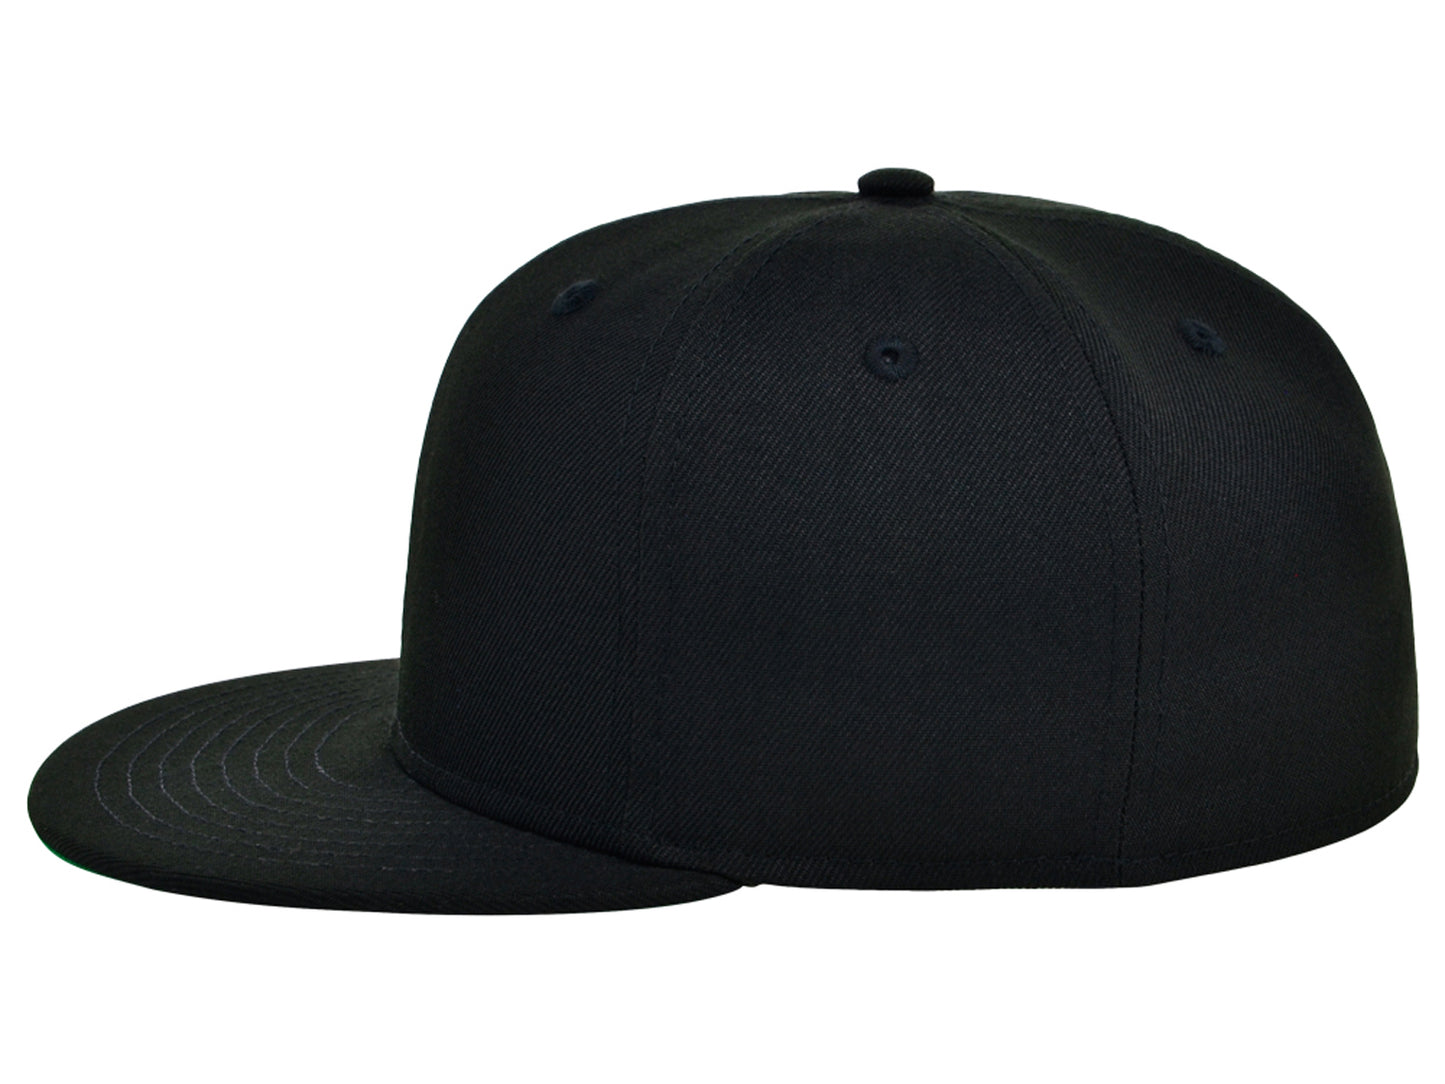 Crowns By Lids Full Court Fitted UV Cap - Black/Green